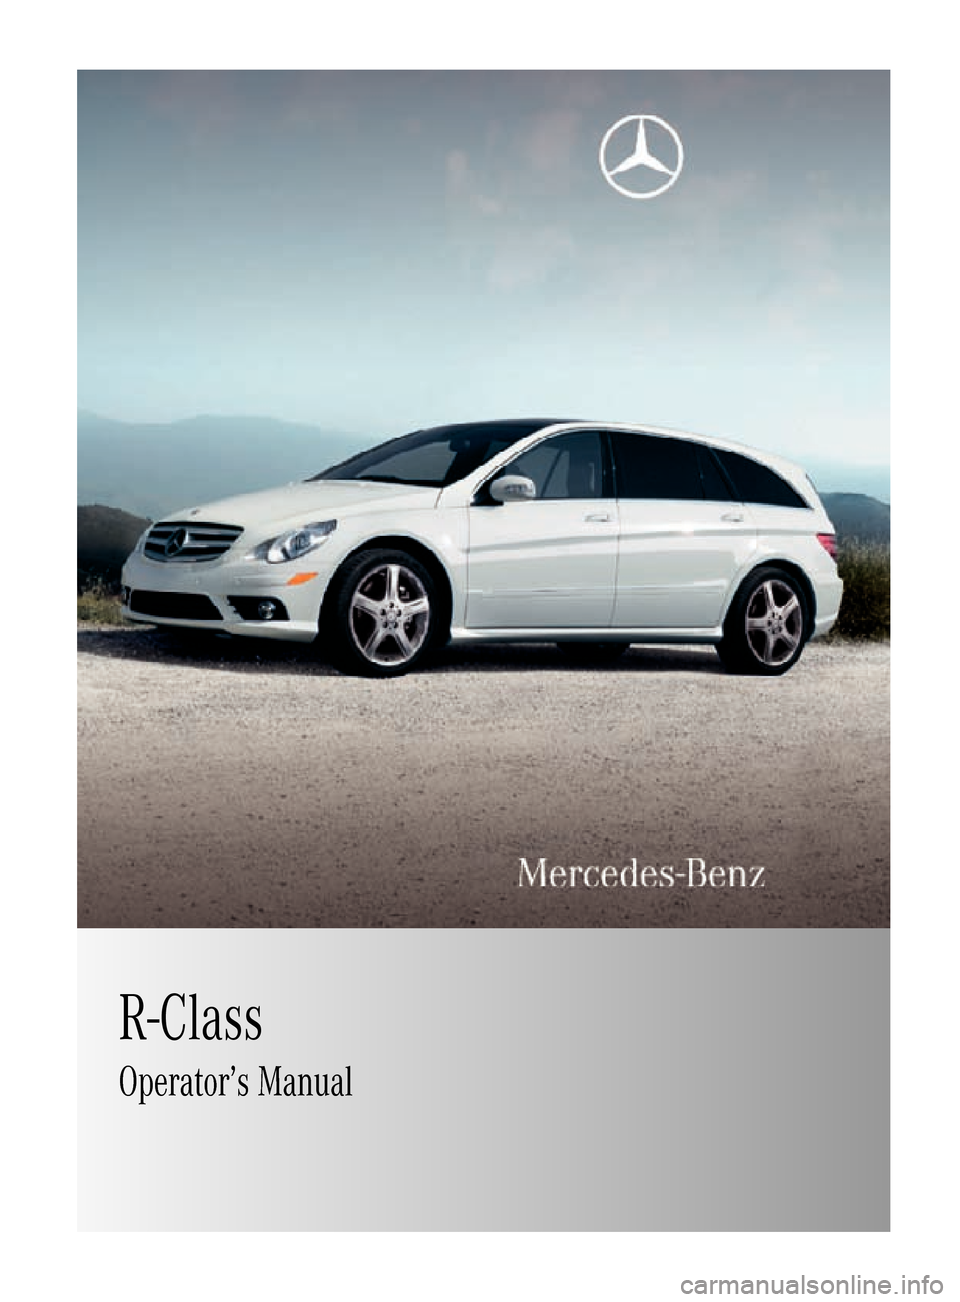 MERCEDES-BENZ R350 2010 W251 Owners Manual R-Class
Operator’s Manual
251_AKB; 4; 52, en-US
d2ureepe,Version: 2.11.8.1 2009-03-23T09:22:52+01:00 - Seite 1    